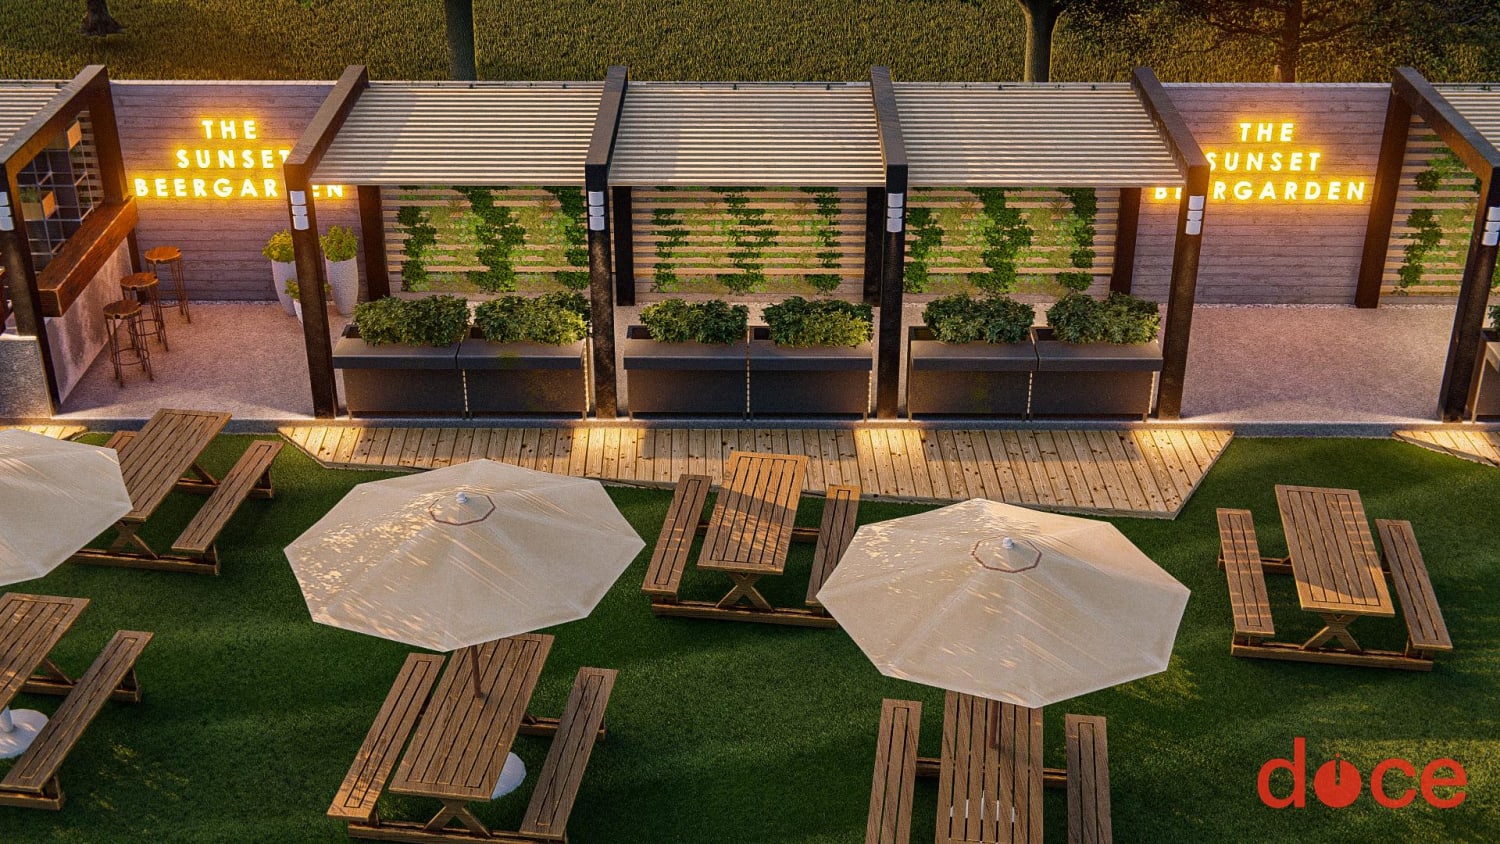 Designing my first restaurant / outdoor brewery. Top view of a pergola area that has planters in between that also double as little bar areas. Just something I thought would be cool, to look at greenery and plants while having a couple of beers.